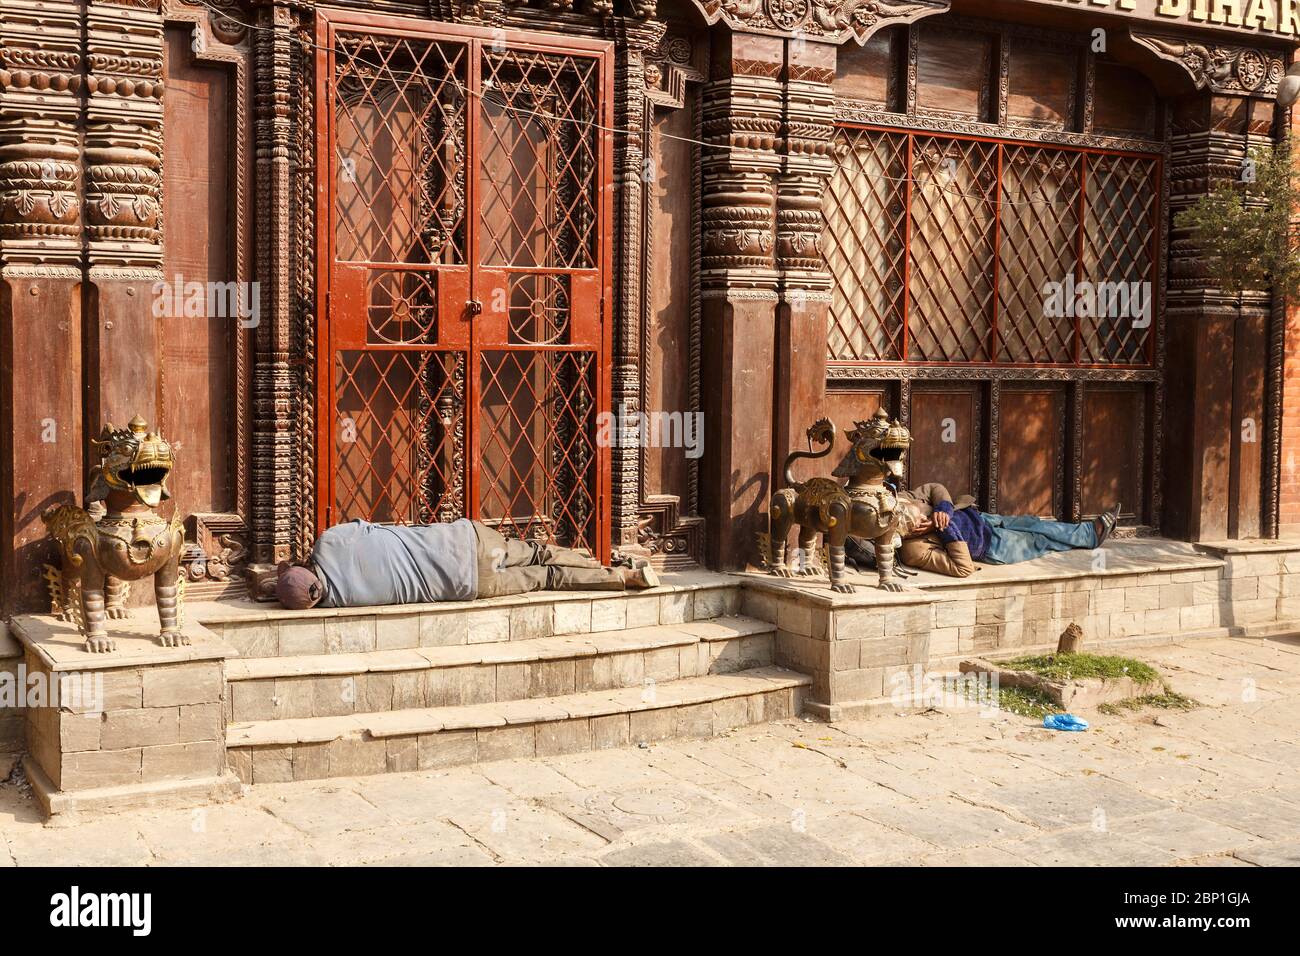 Kathmandu, Nepal - November 25, 2016: Two adult Nepalese men sleep on the steps in front of the temple entrance. Stock Photo